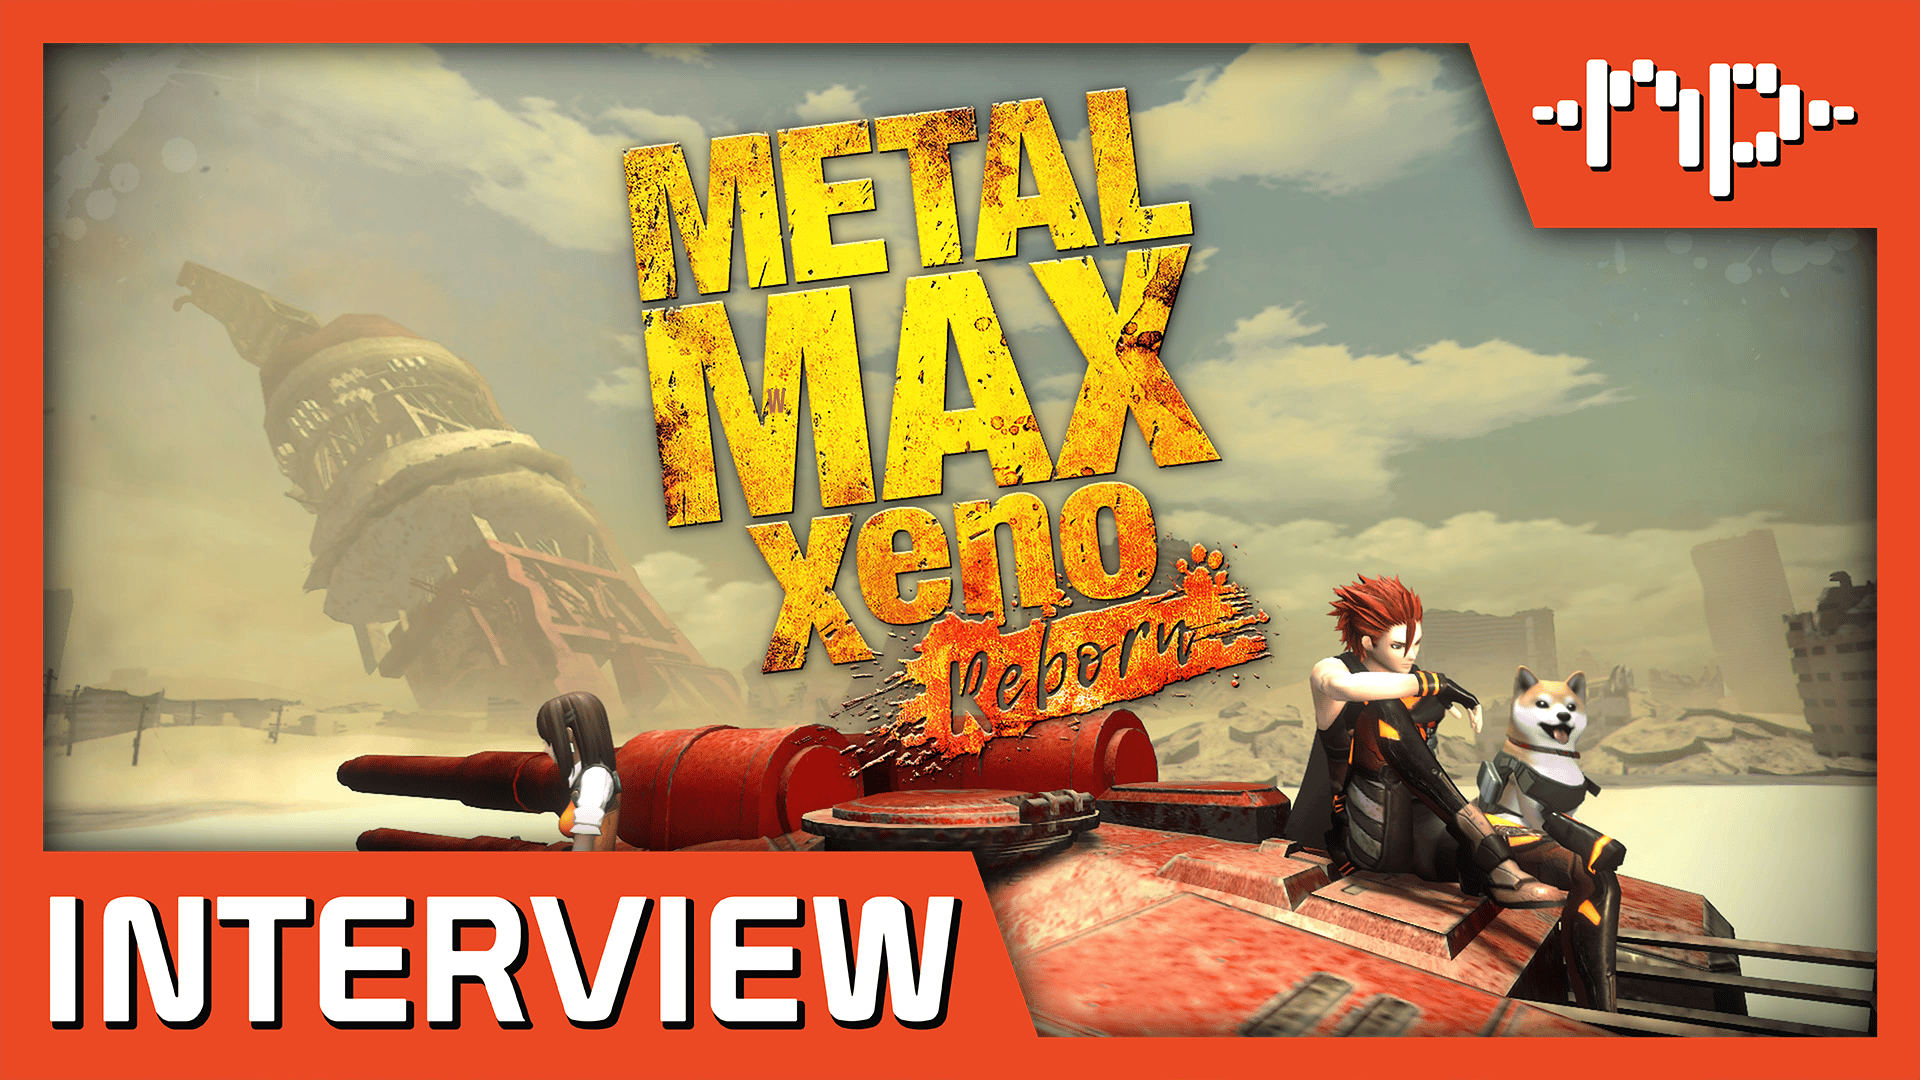 Metal Max Xeno Reborn Interview With Director Tomono Yusuke Reveals Details About Development, Combat Systems, and the Battle-Dog Pochi